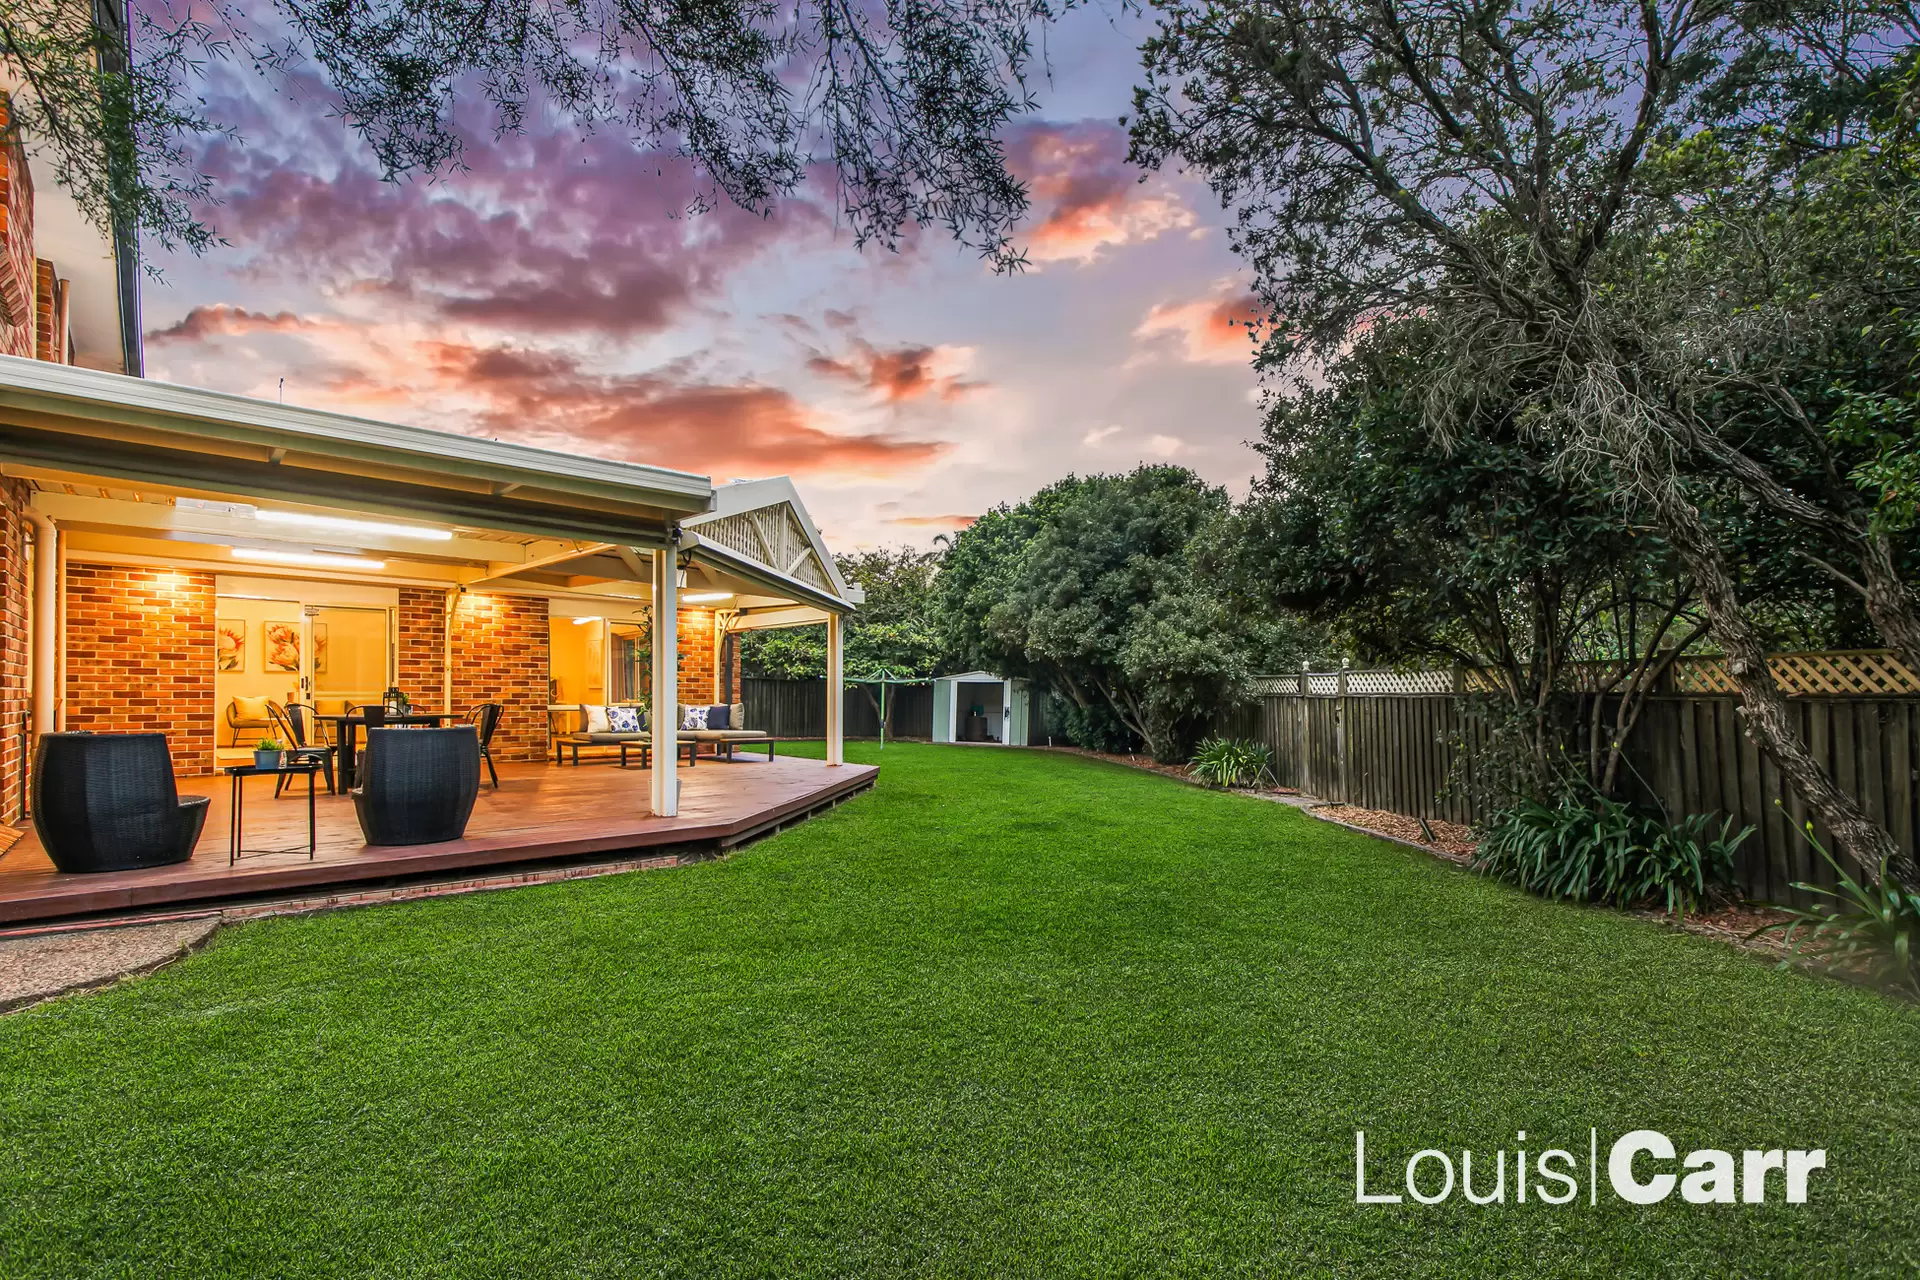 Photo #11: 37 Darlington Drive, Cherrybrook - Sold by Louis Carr Real Estate